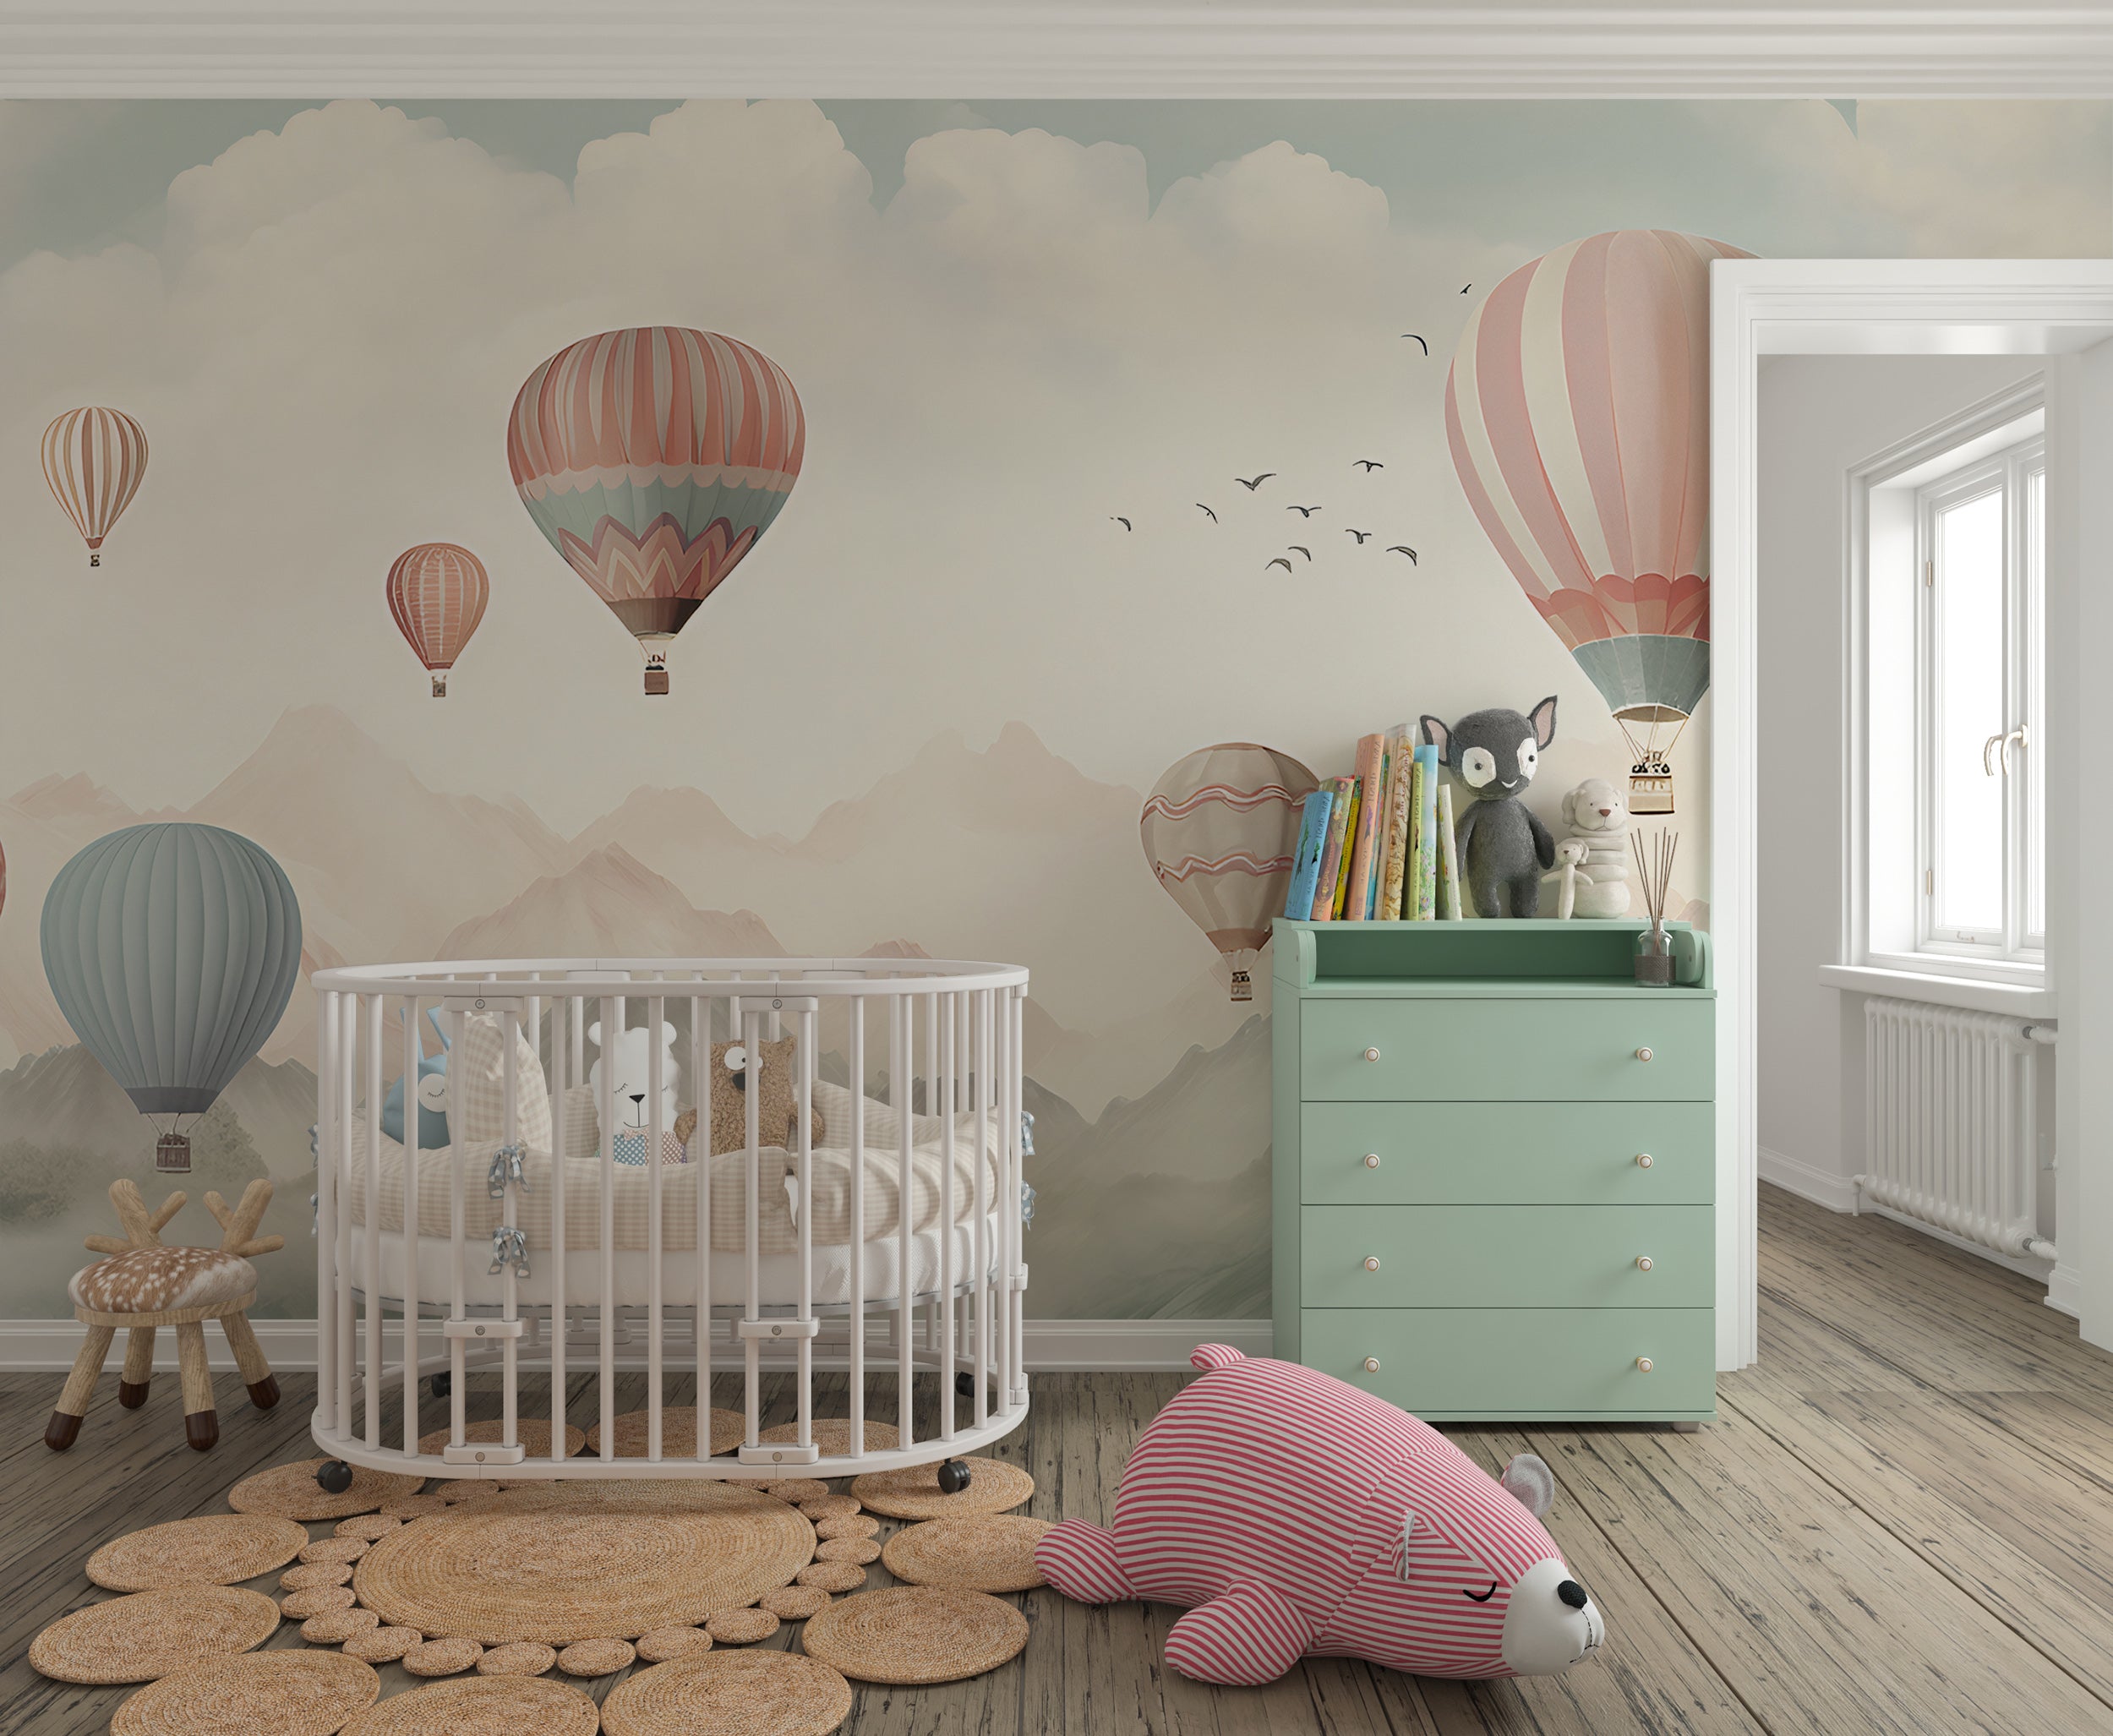 Transform Your Nursery with Hot Air Balloons